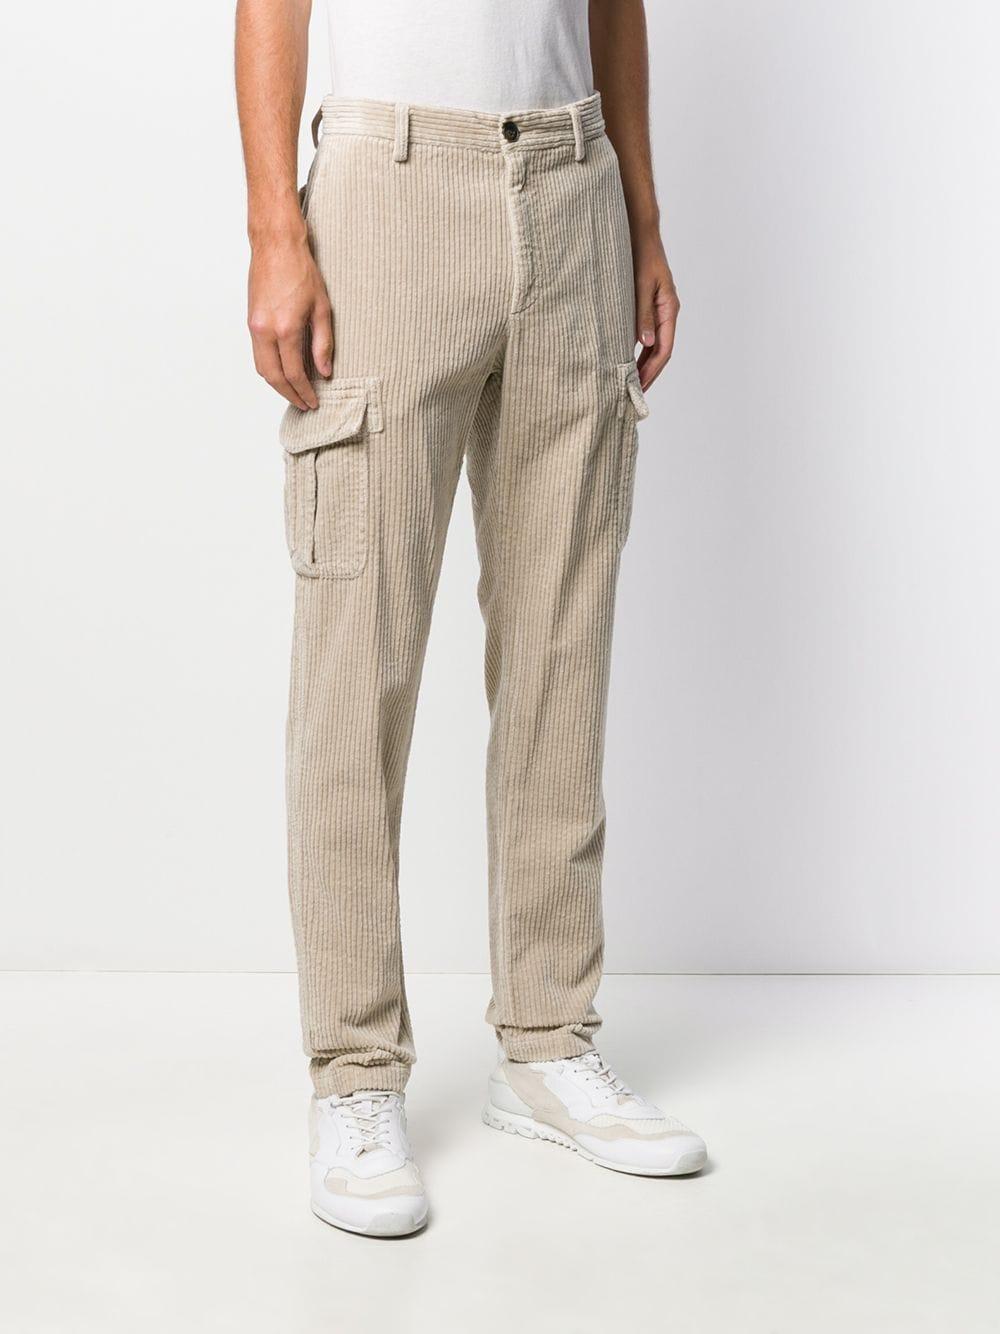 Eleventy Cargo Pocket Corduroy Trousers in Natural for Men - Lyst